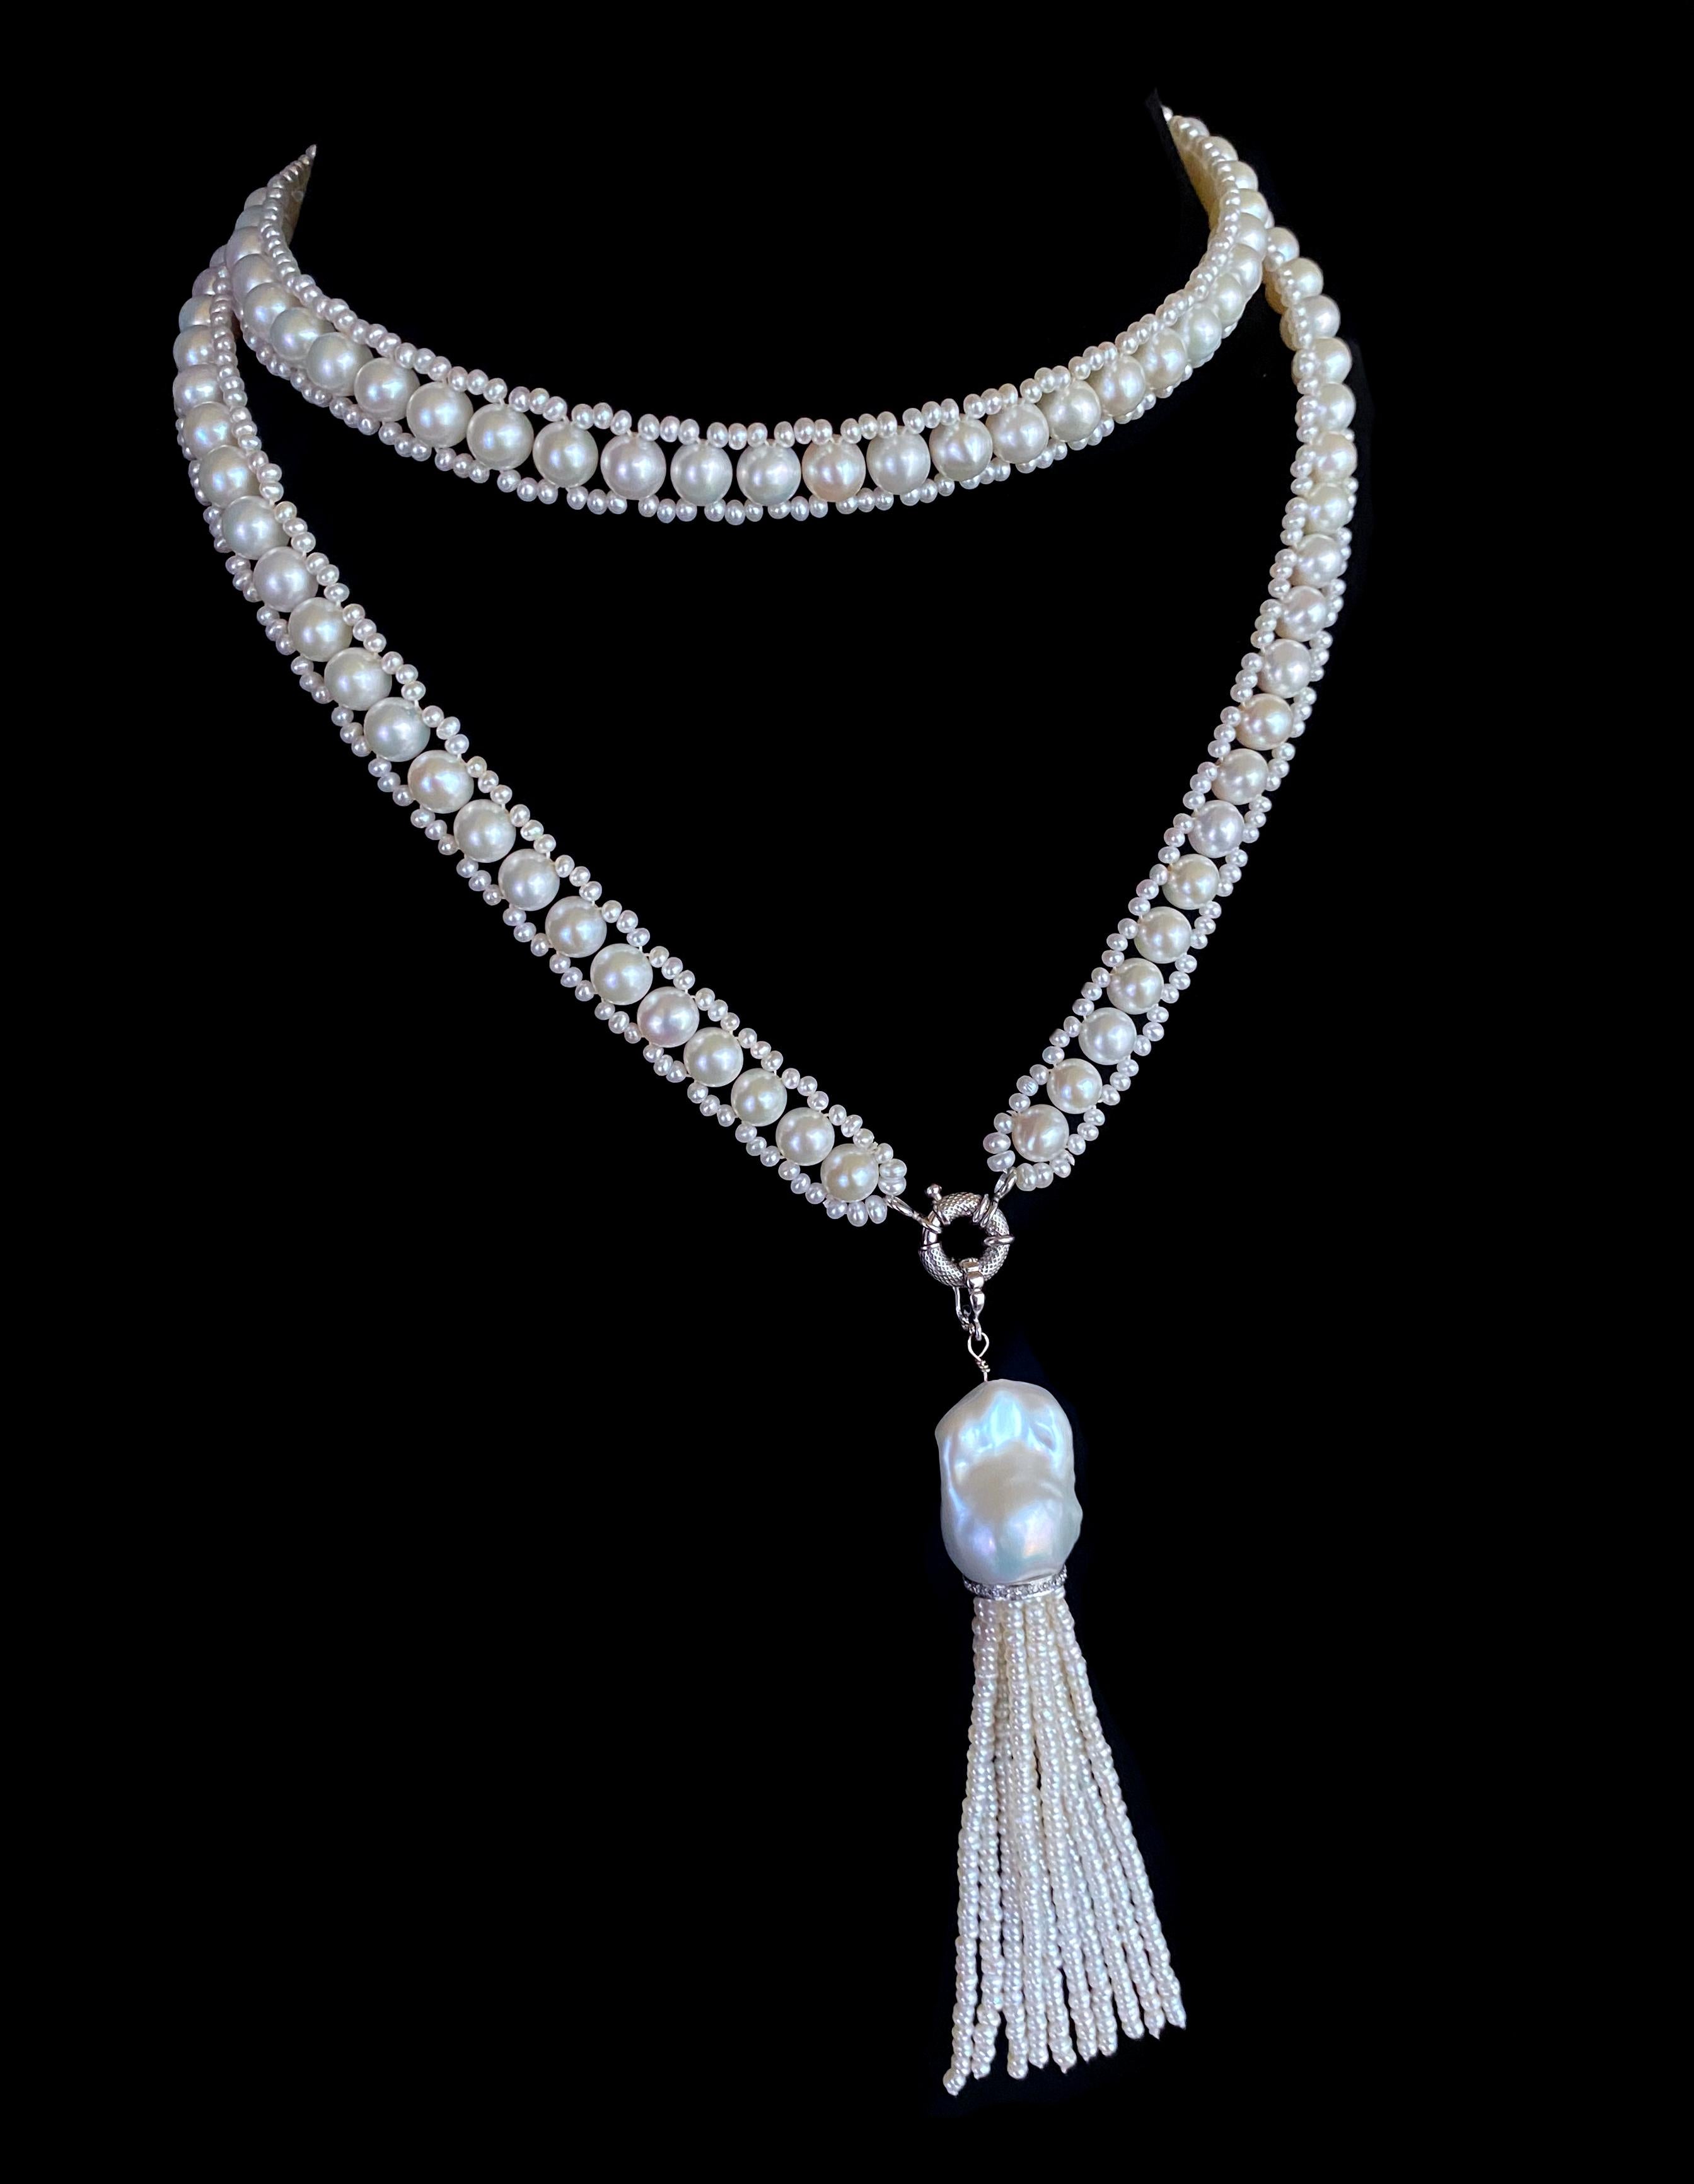 Classic piece by Marina J. This sautoir is made of multi sized Pearls woven together into a column like design. The white Pearls hold a beautiful luster to them that perfectly match the dramatic, removable Tassel. Measuring 33 inches long sans